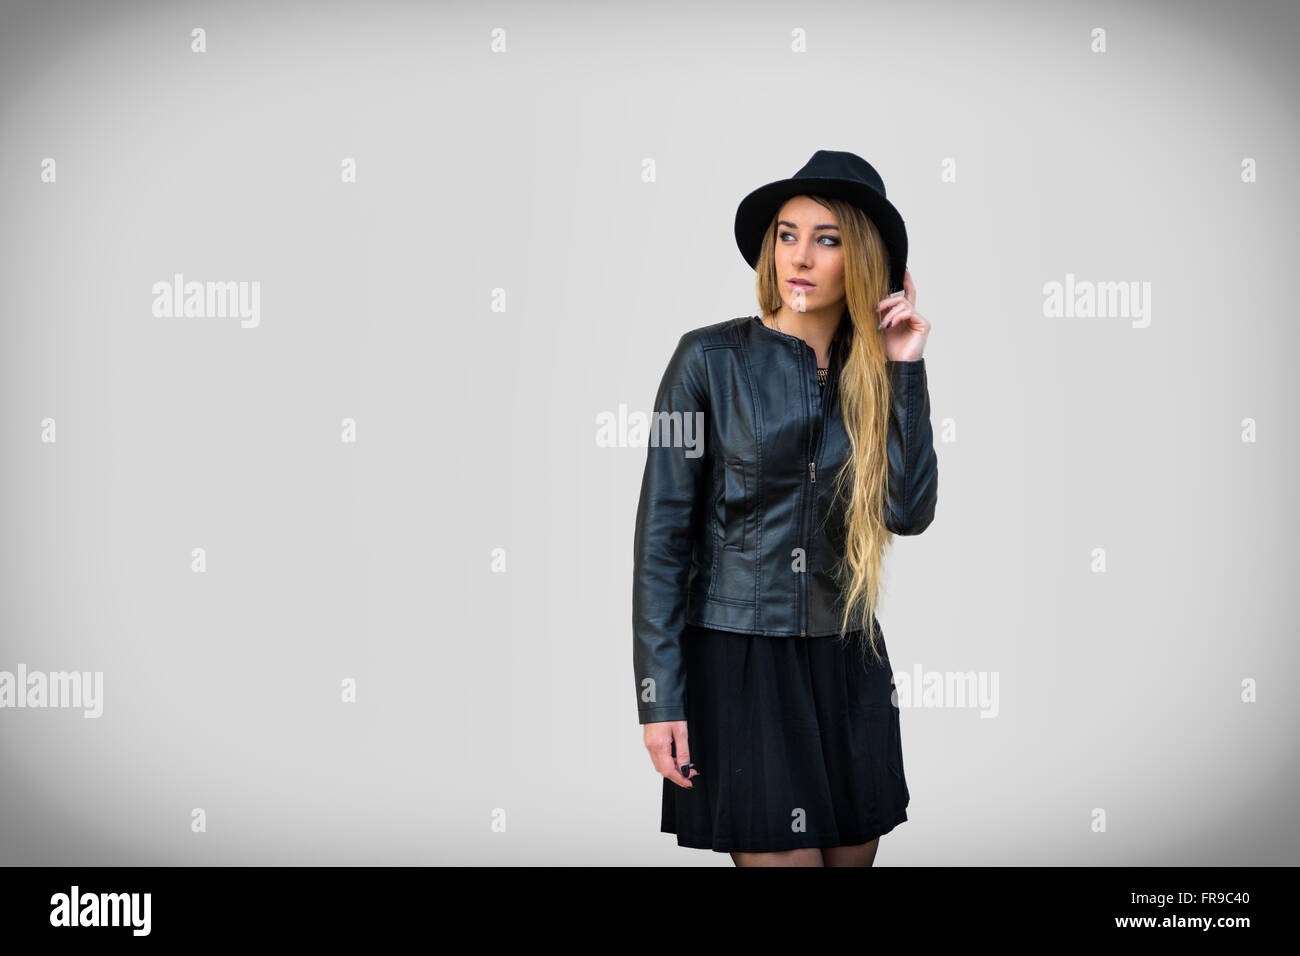 Portrait of attractive blonde woman in black hat and leather jacket looking at camera Stock Photo